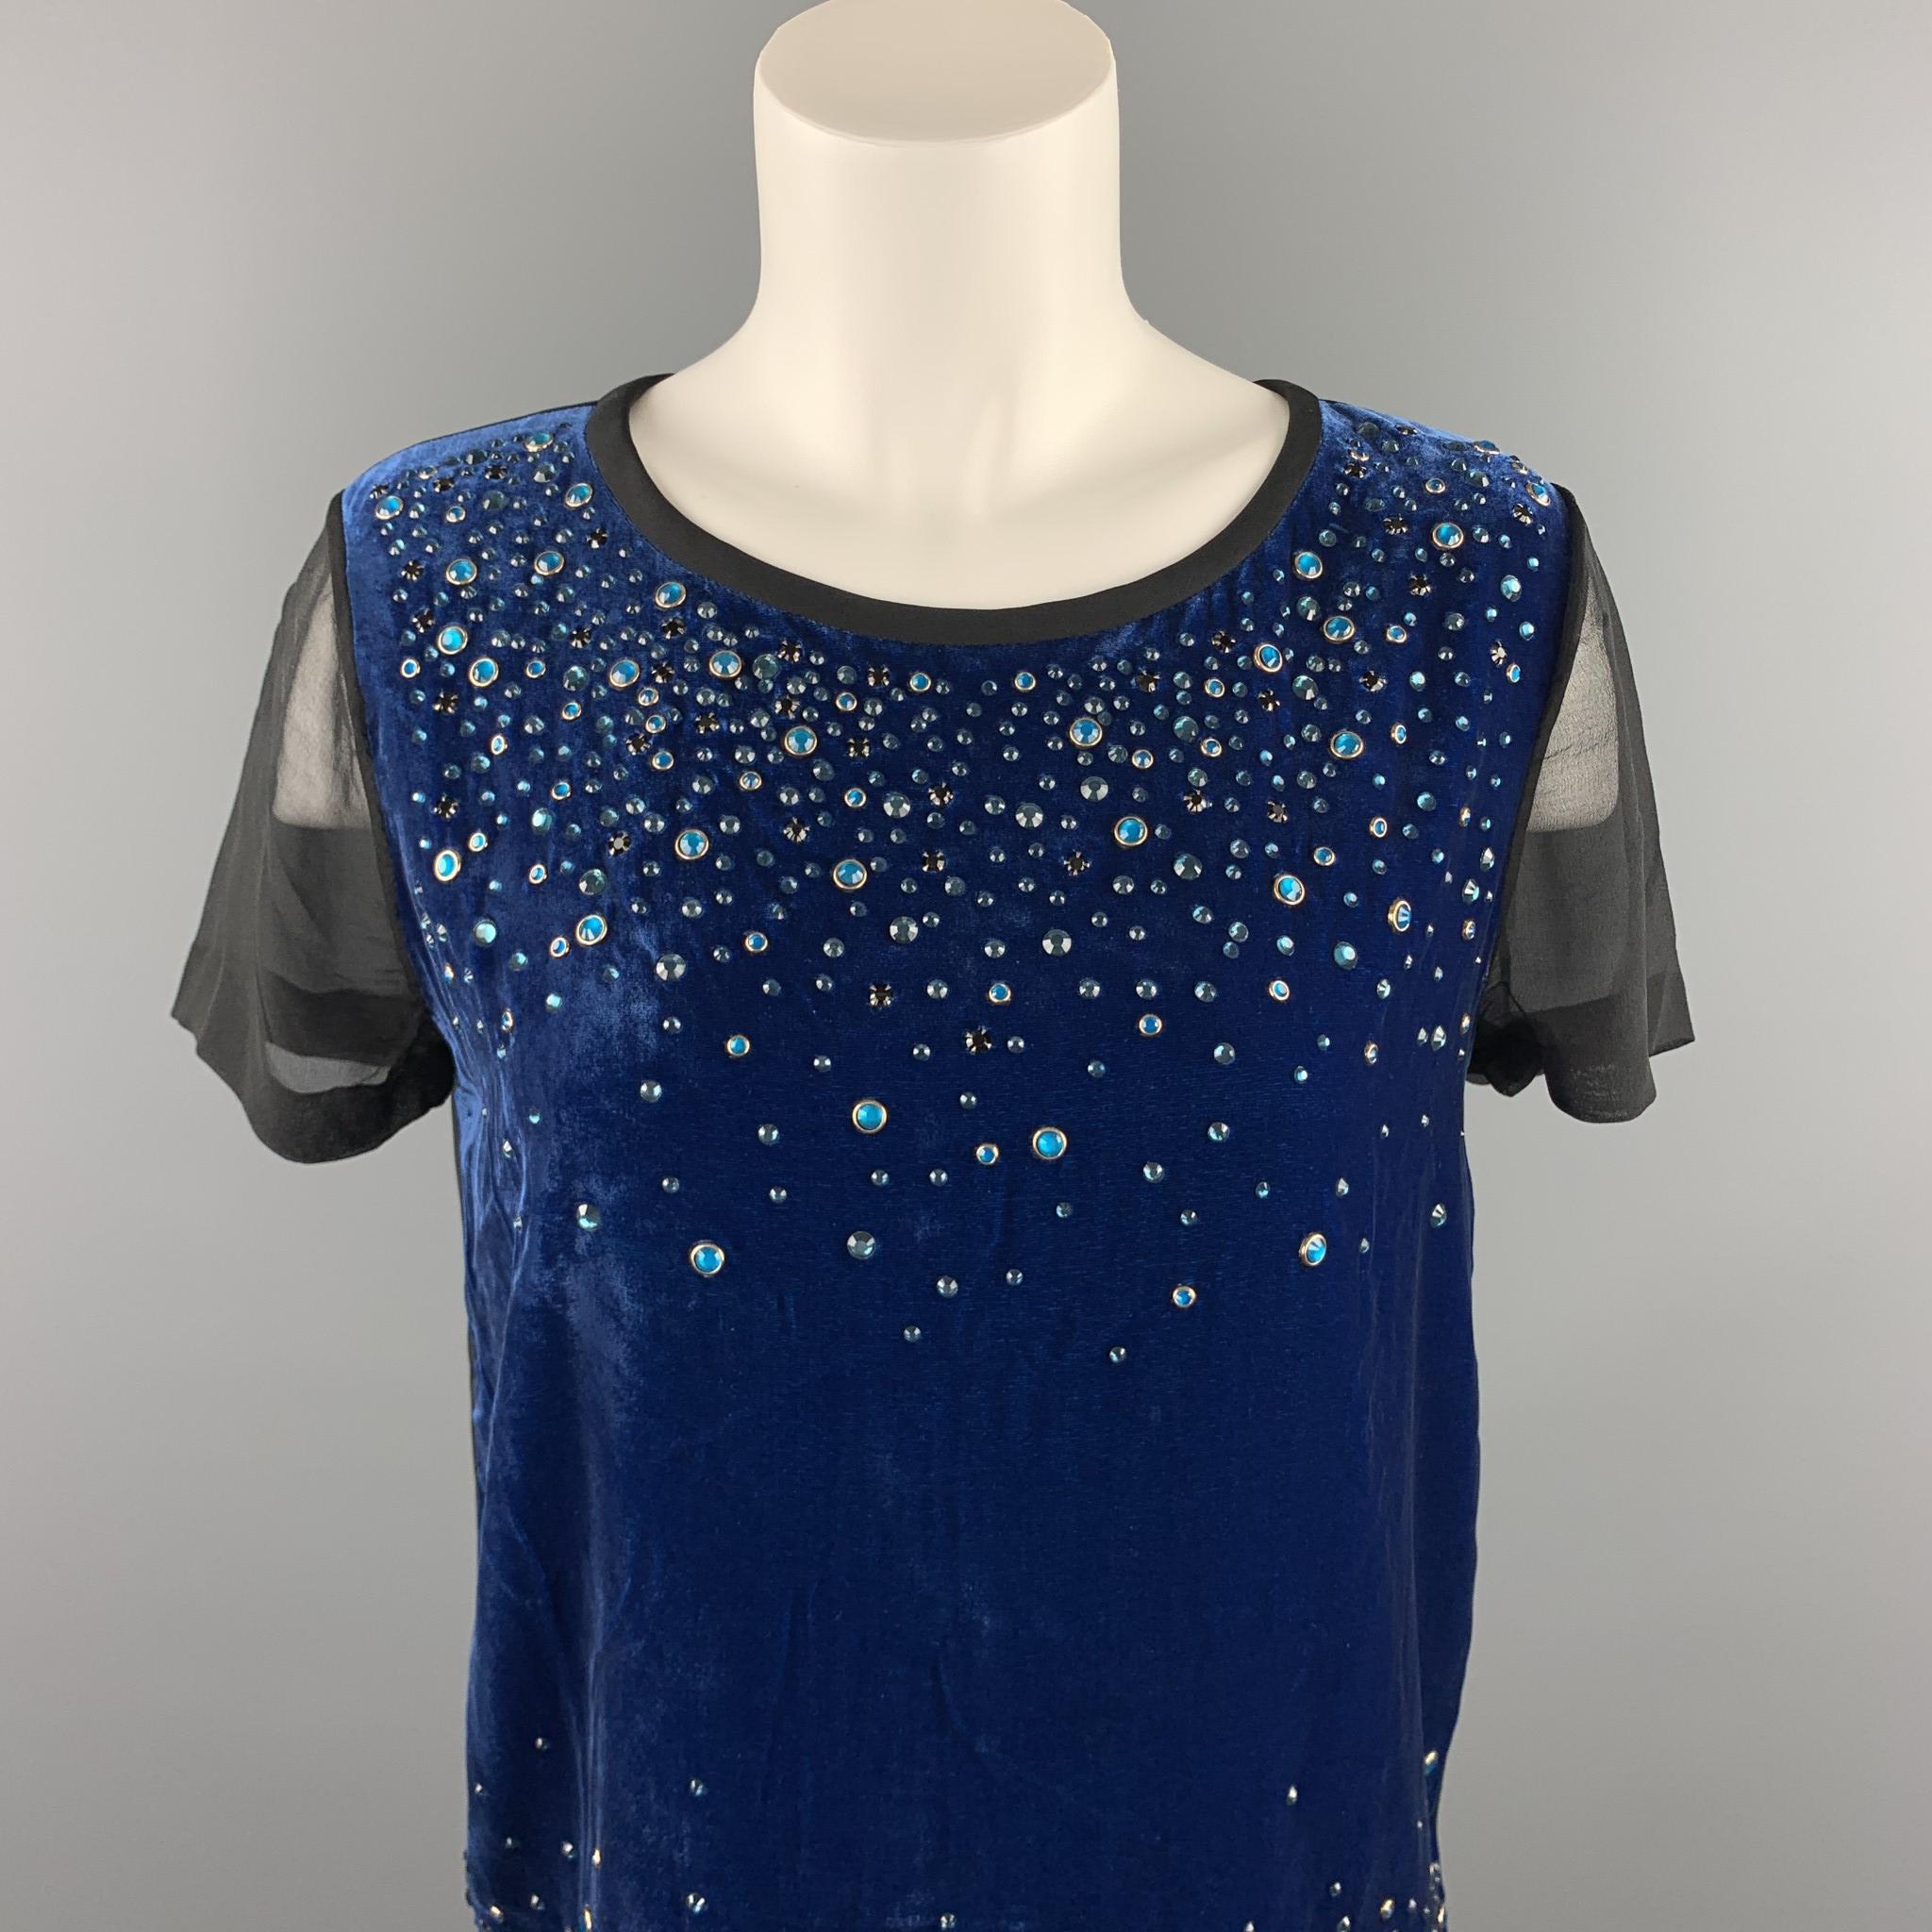 DIANE VON FURSTENBERG blouse comes in a black & blue rayon & silk with rhinestone details featuring a layered style and a back zip up closure.

Very Good Pre-Owned Condition.
Marked: 6

Measurements:

Shoulder: 15.5 in.
Bust: 36 in.
Sleeve: 7 in.